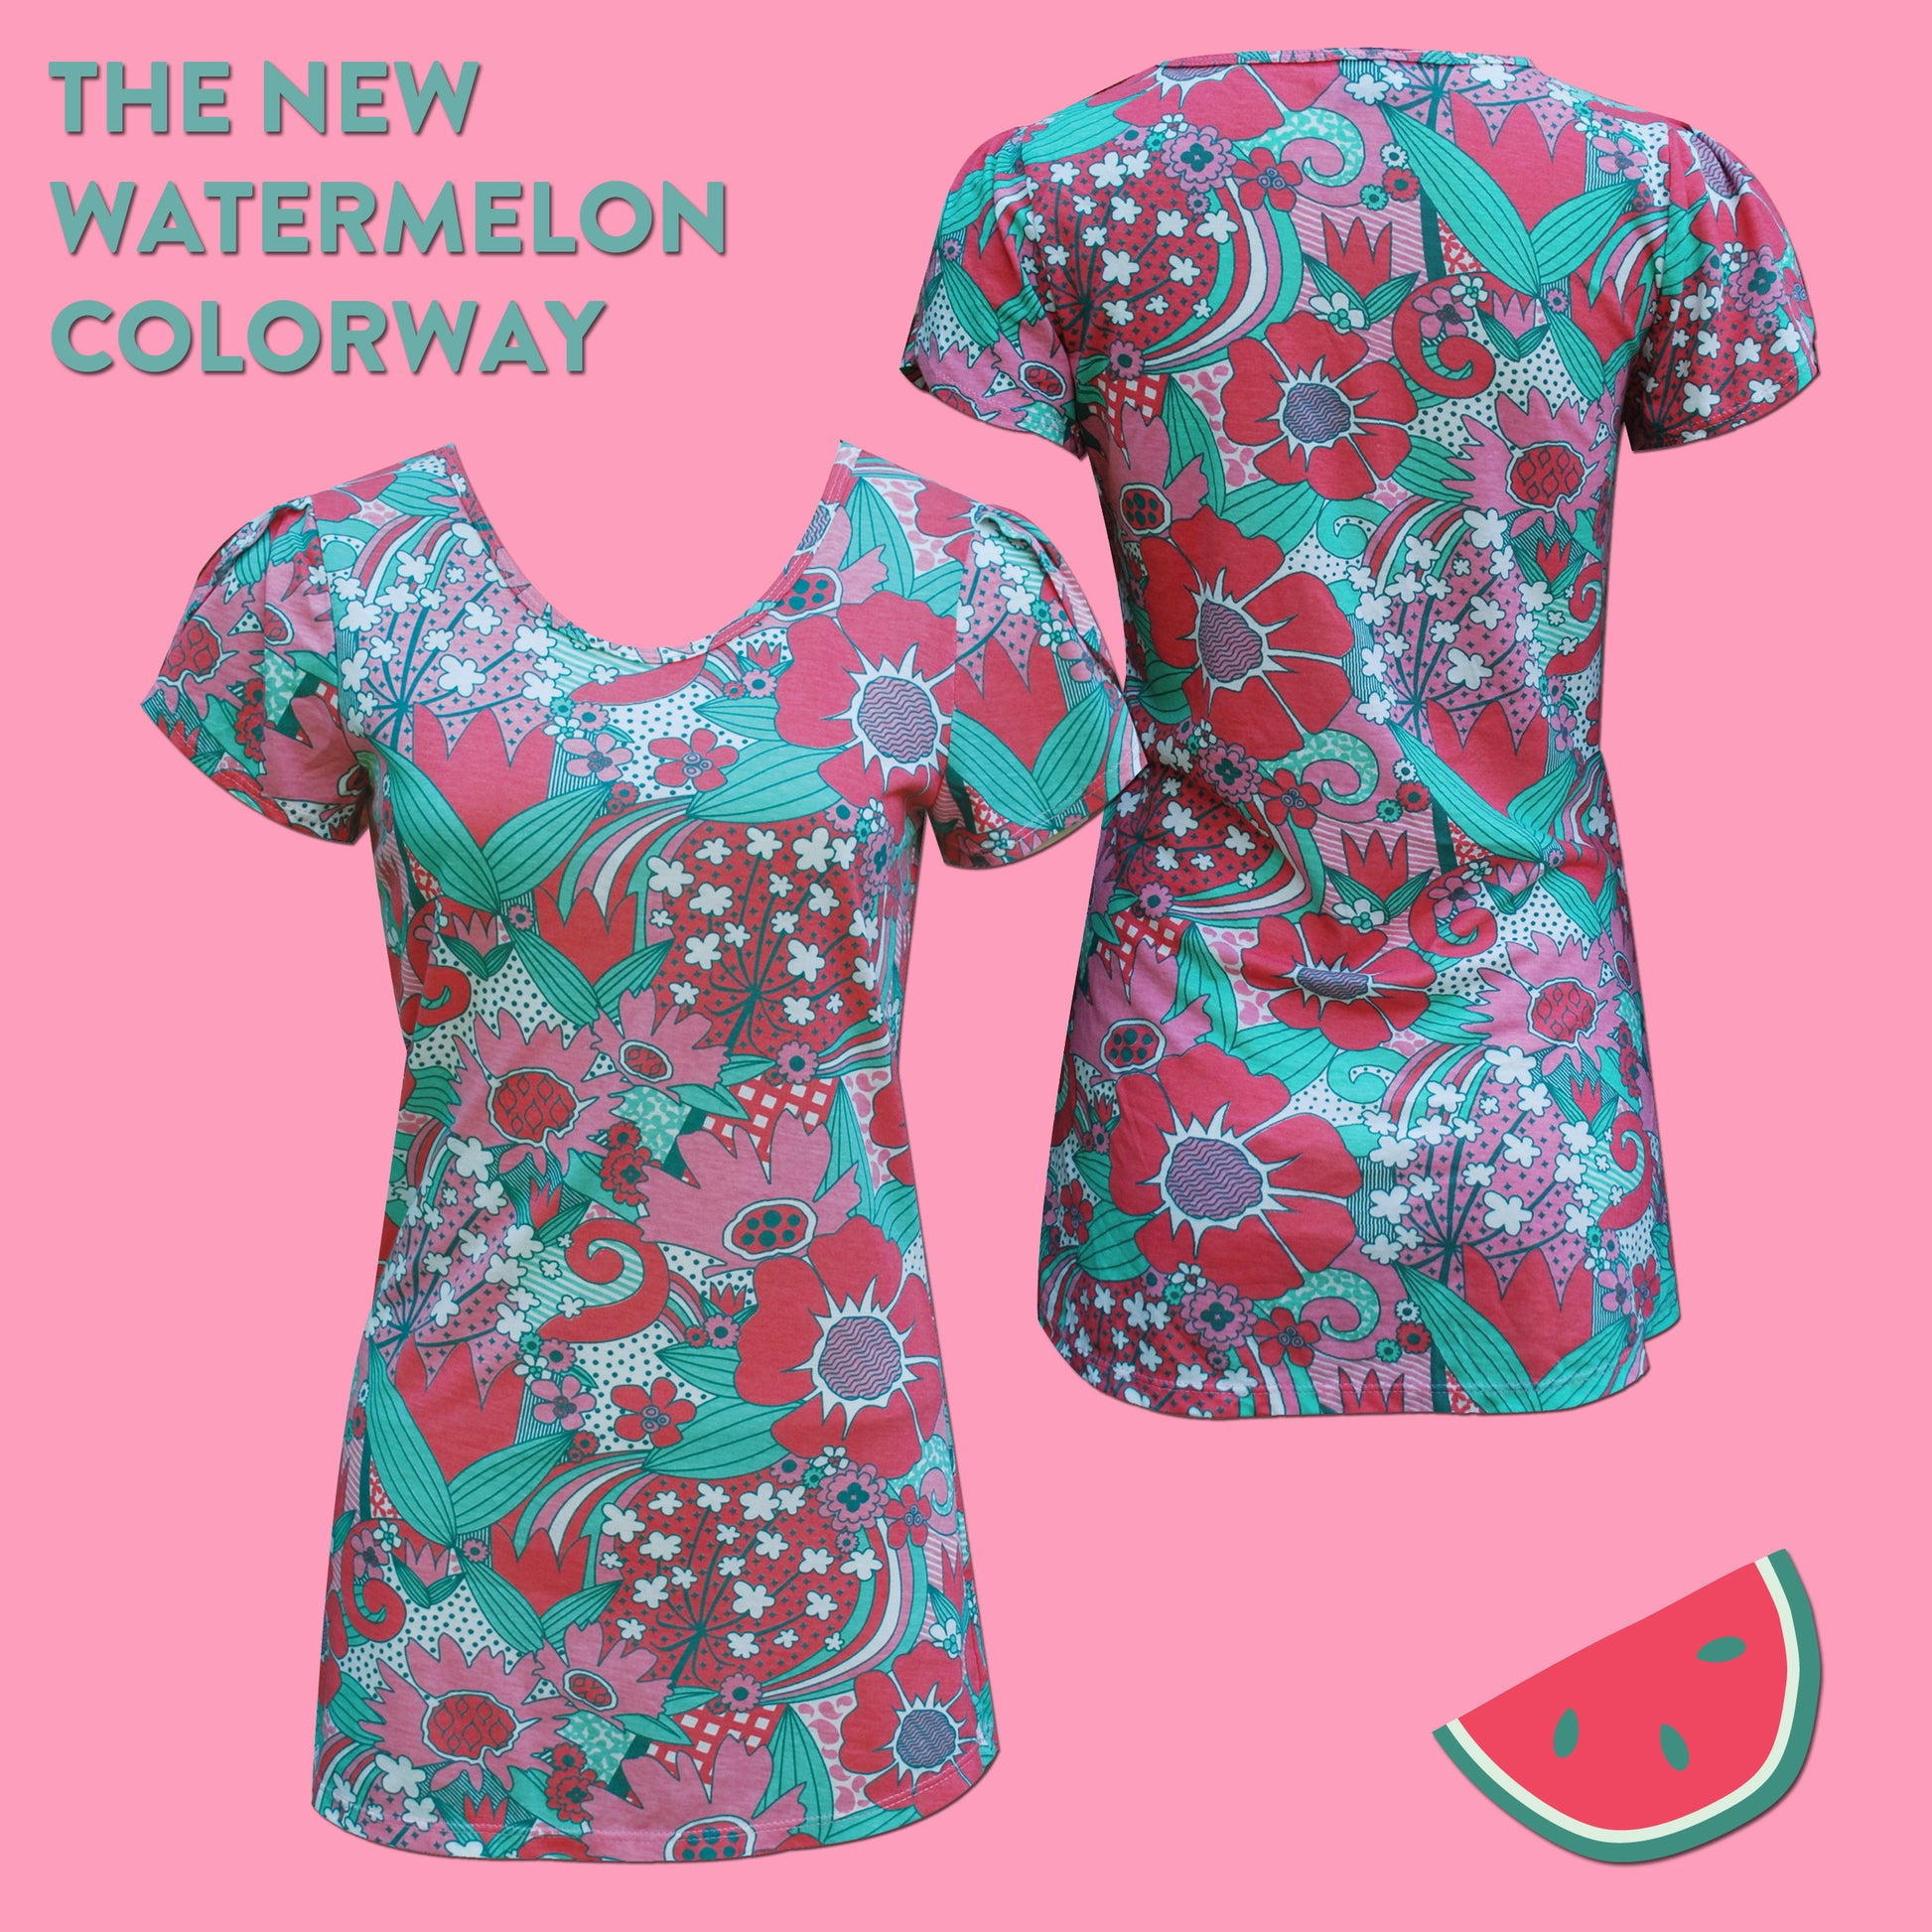 Tulip-sleeved pink and green floral tee, front and back, on pink background and "The New Watermelon Colorway" text